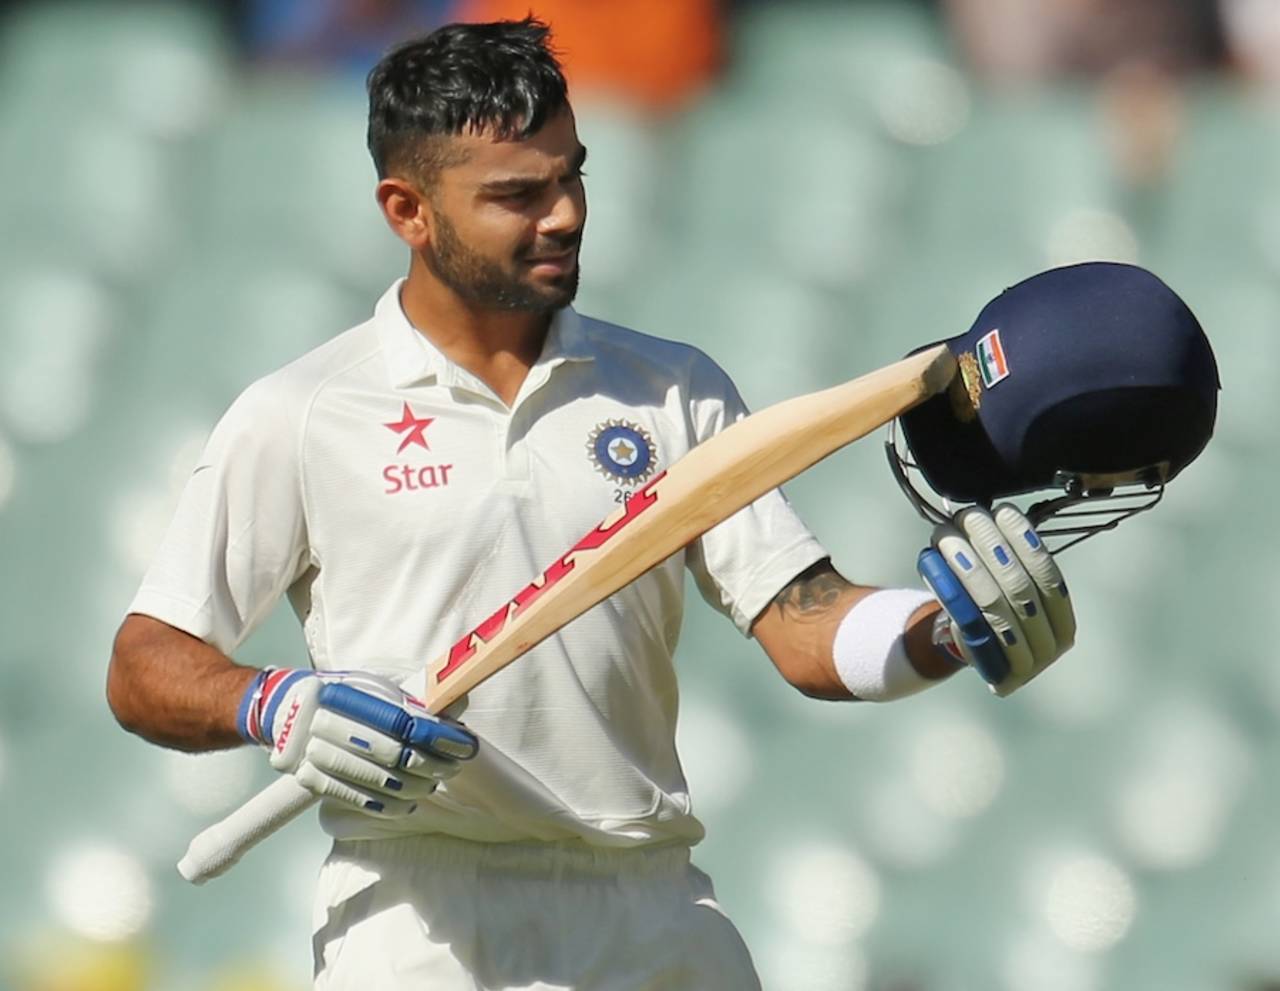 Virat Kohli points to the crest and flag on his helmet after reaching his ton, Australia v India, 1st Test, Adelaide, 3rd day, December 11, 2014